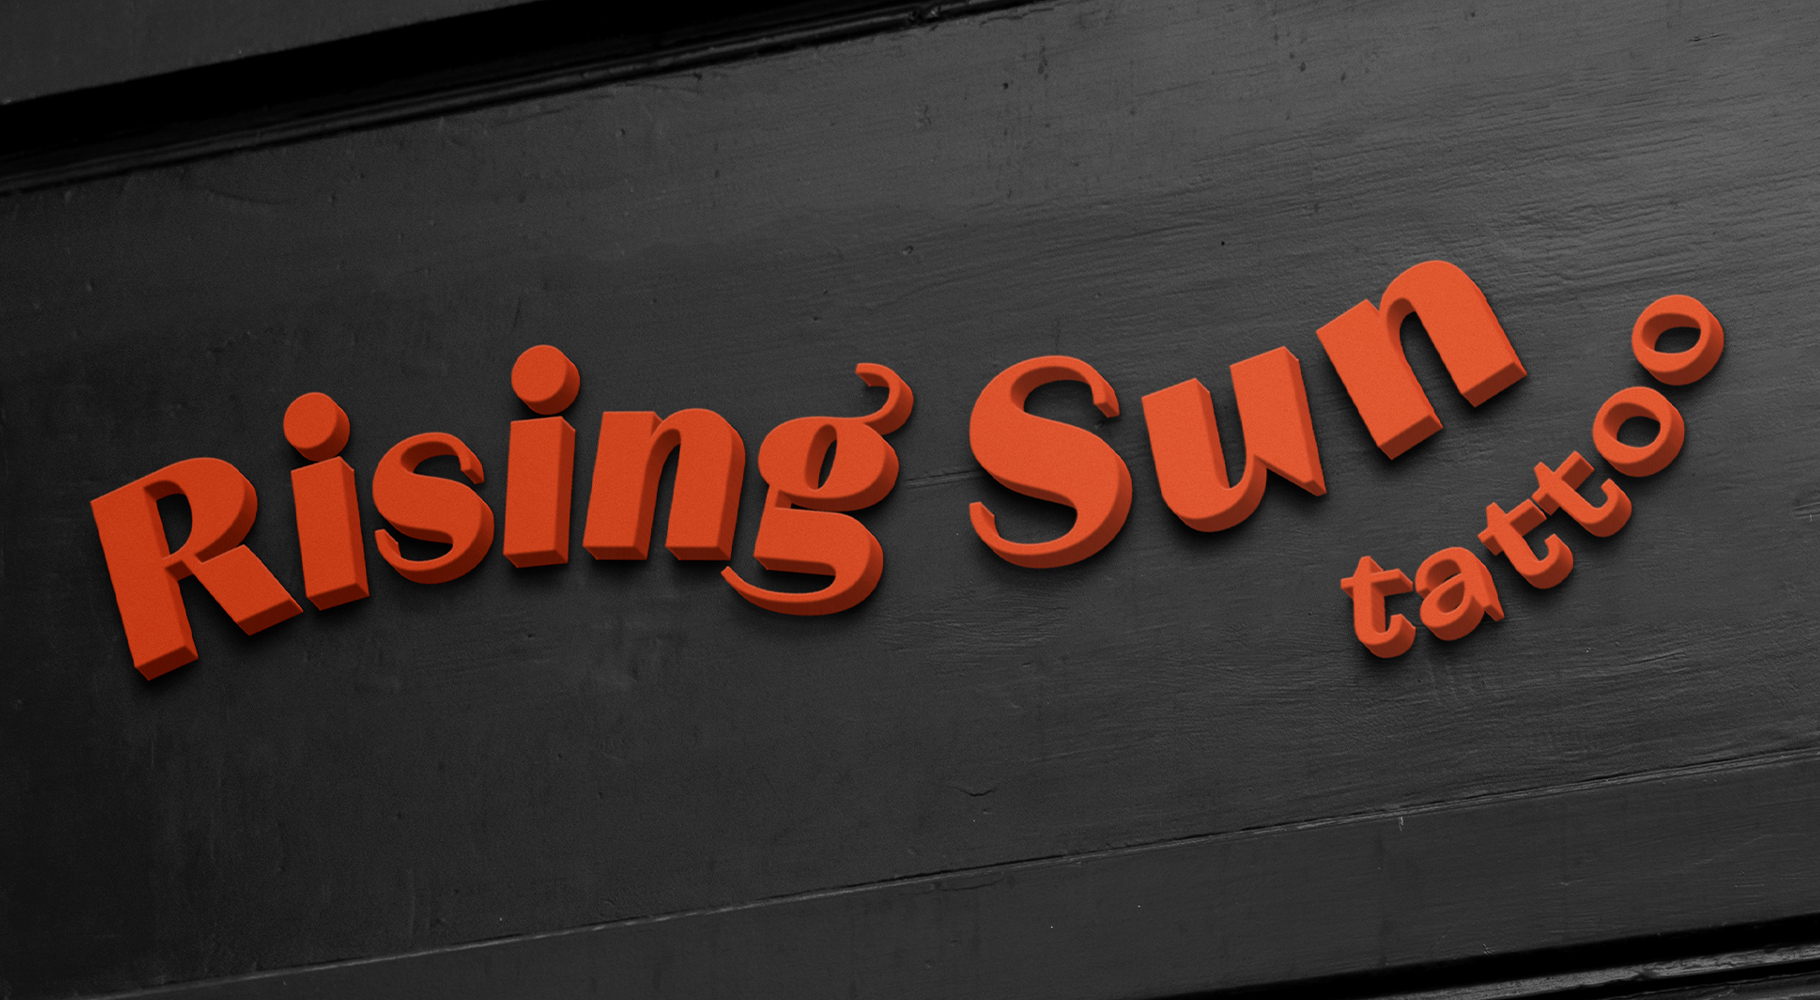 Red Rising Sun logo displayed on a black building.